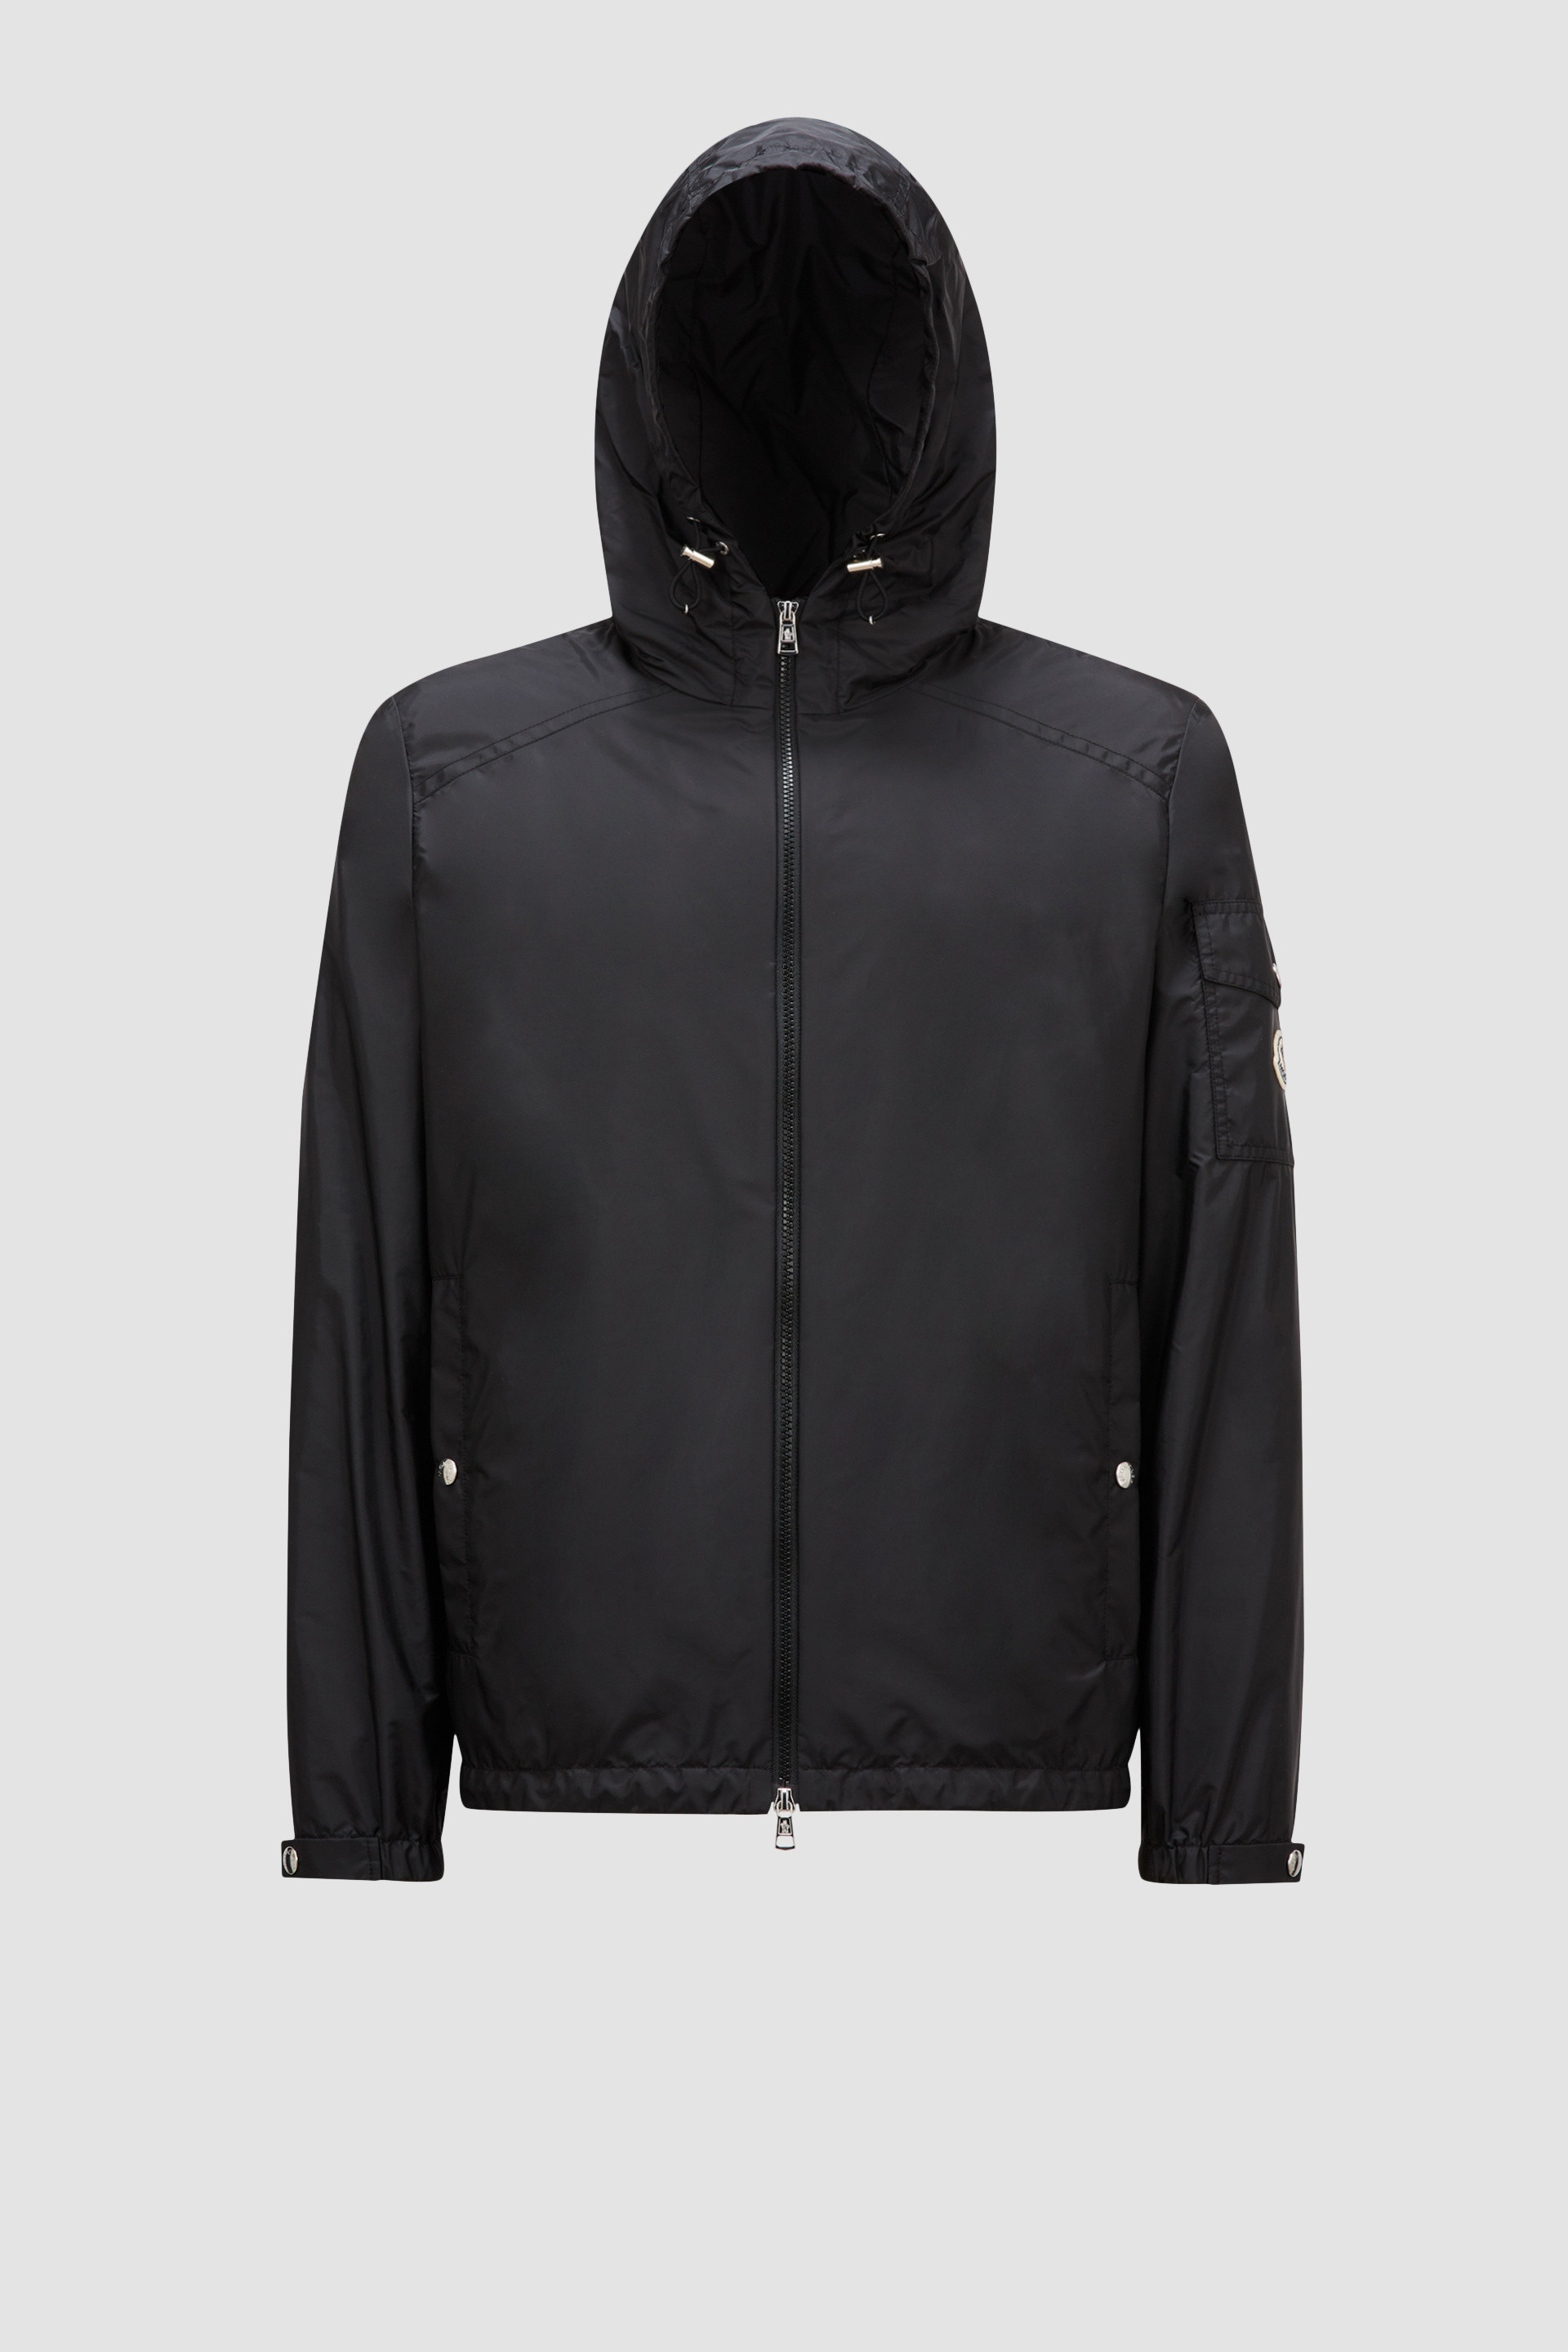 Moncler Finland Online Shop — Down jackets, vests, and clothing